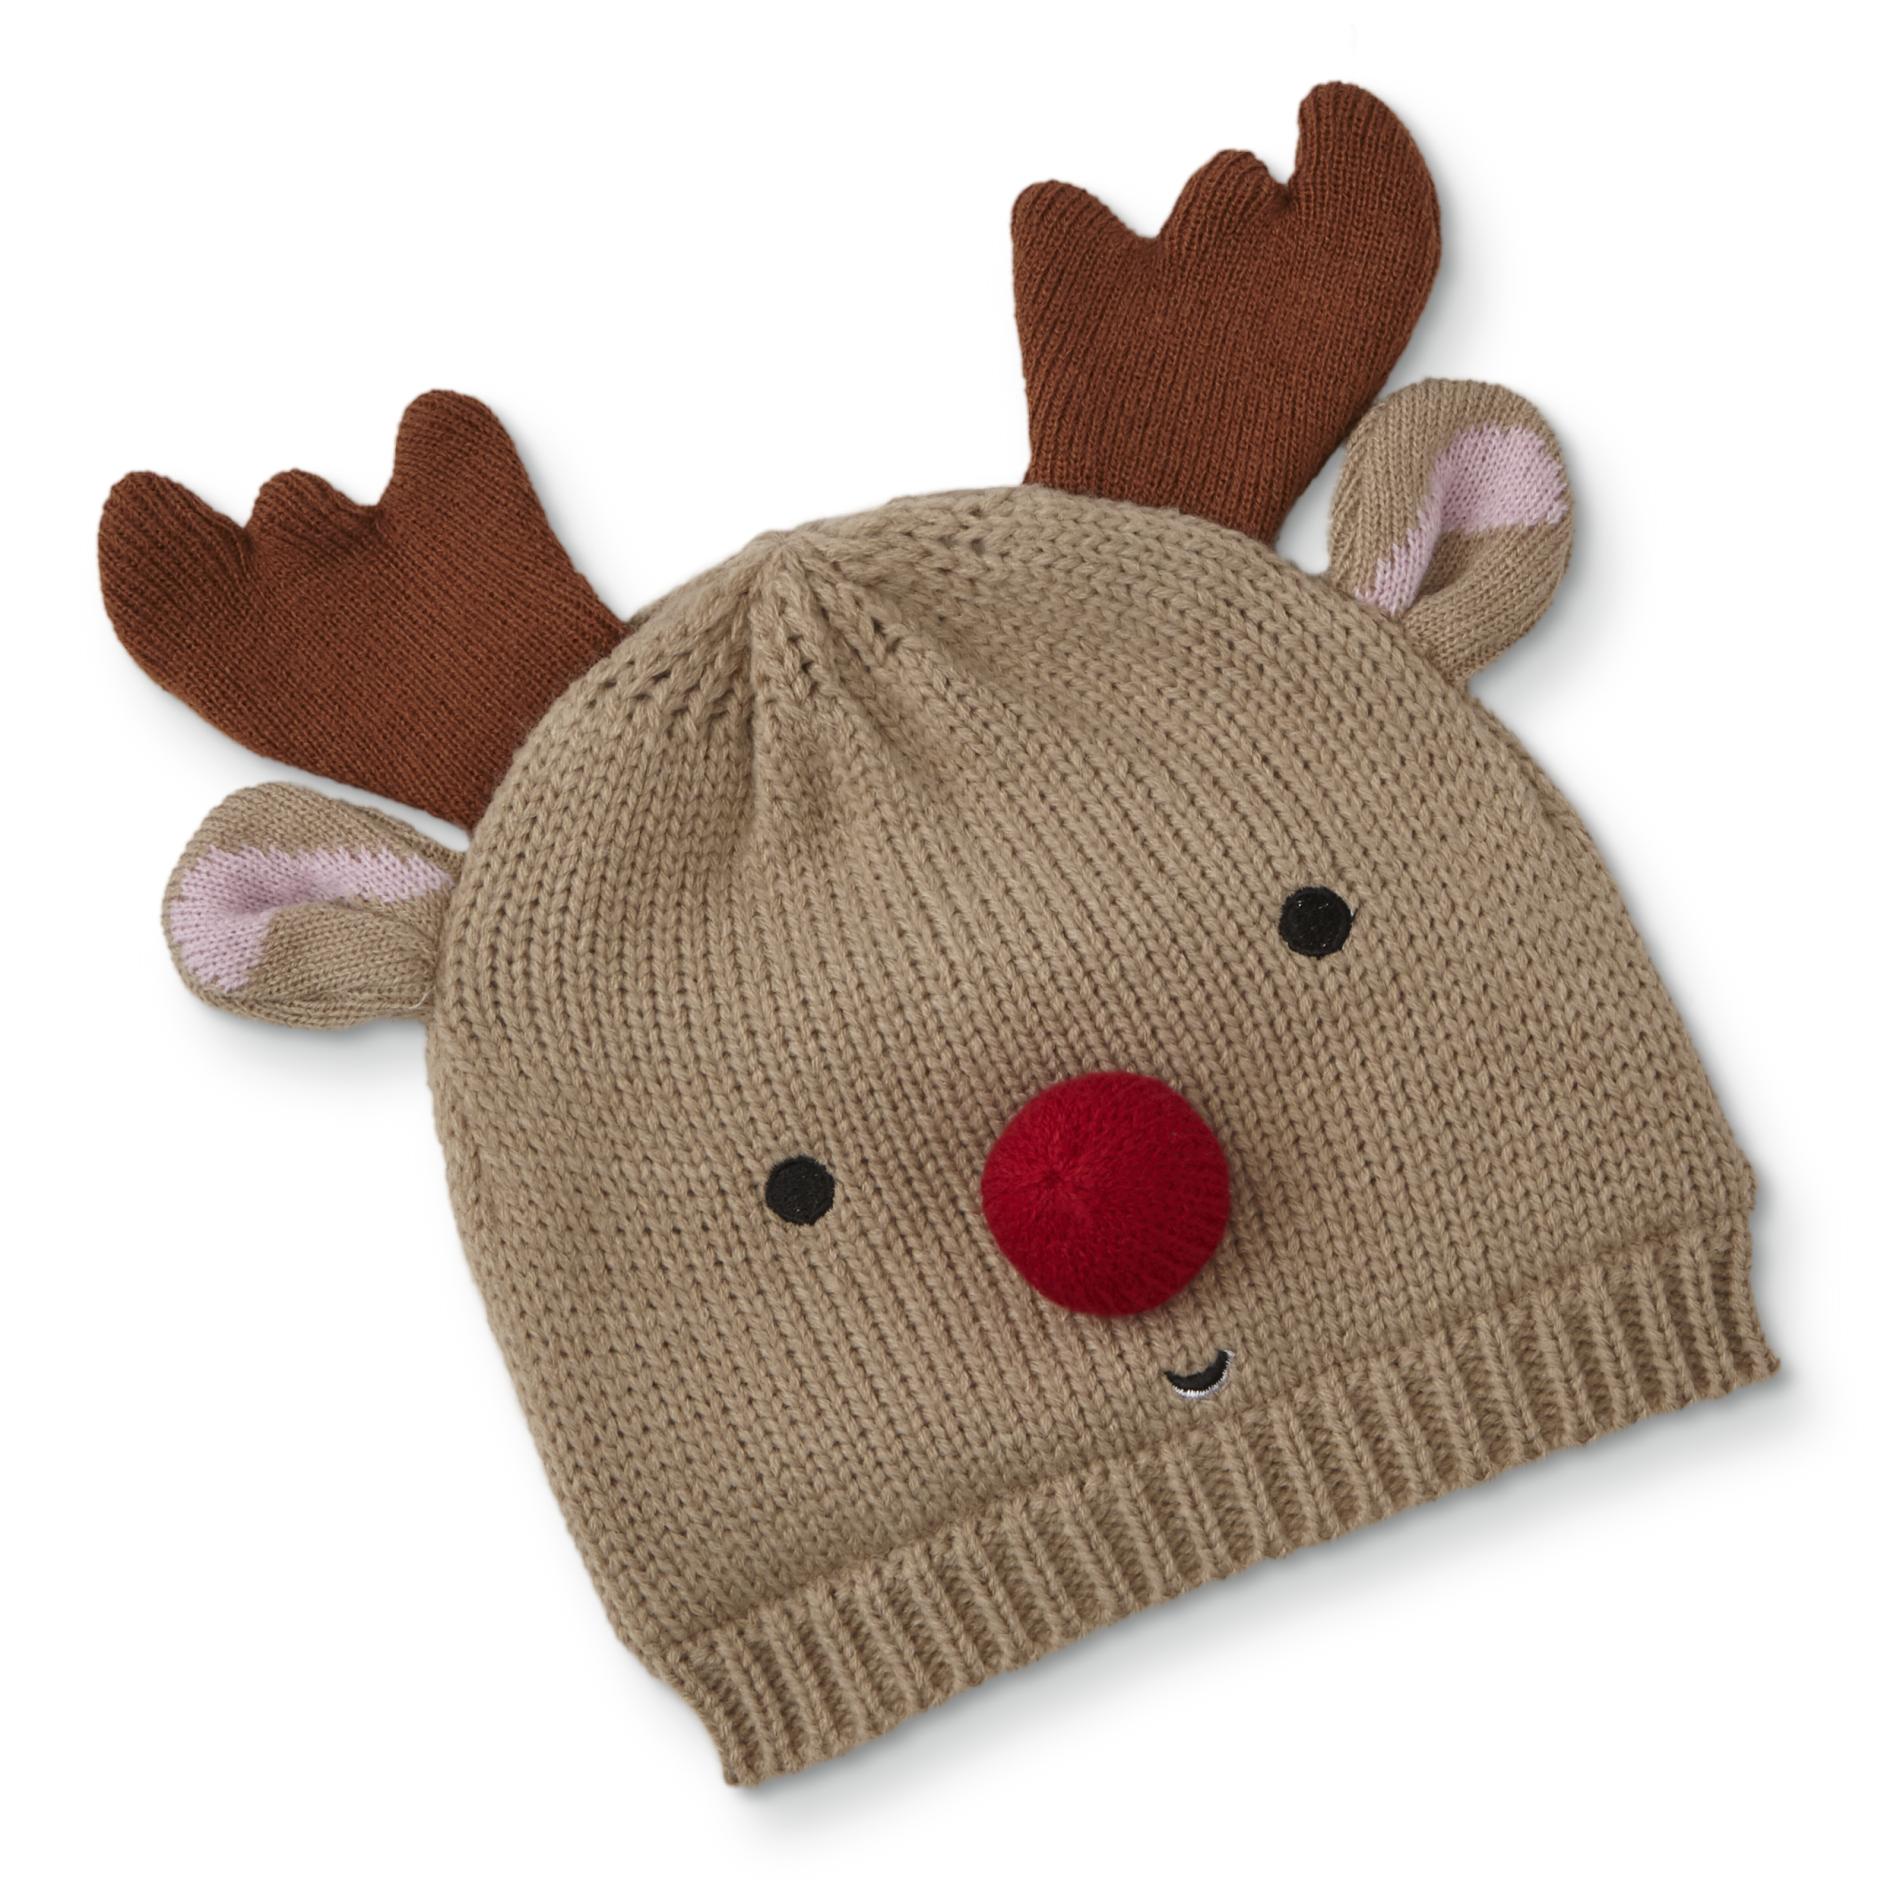 Basic Editions Infant Boys' Beanie Hat - Red-Nosed Reindeer